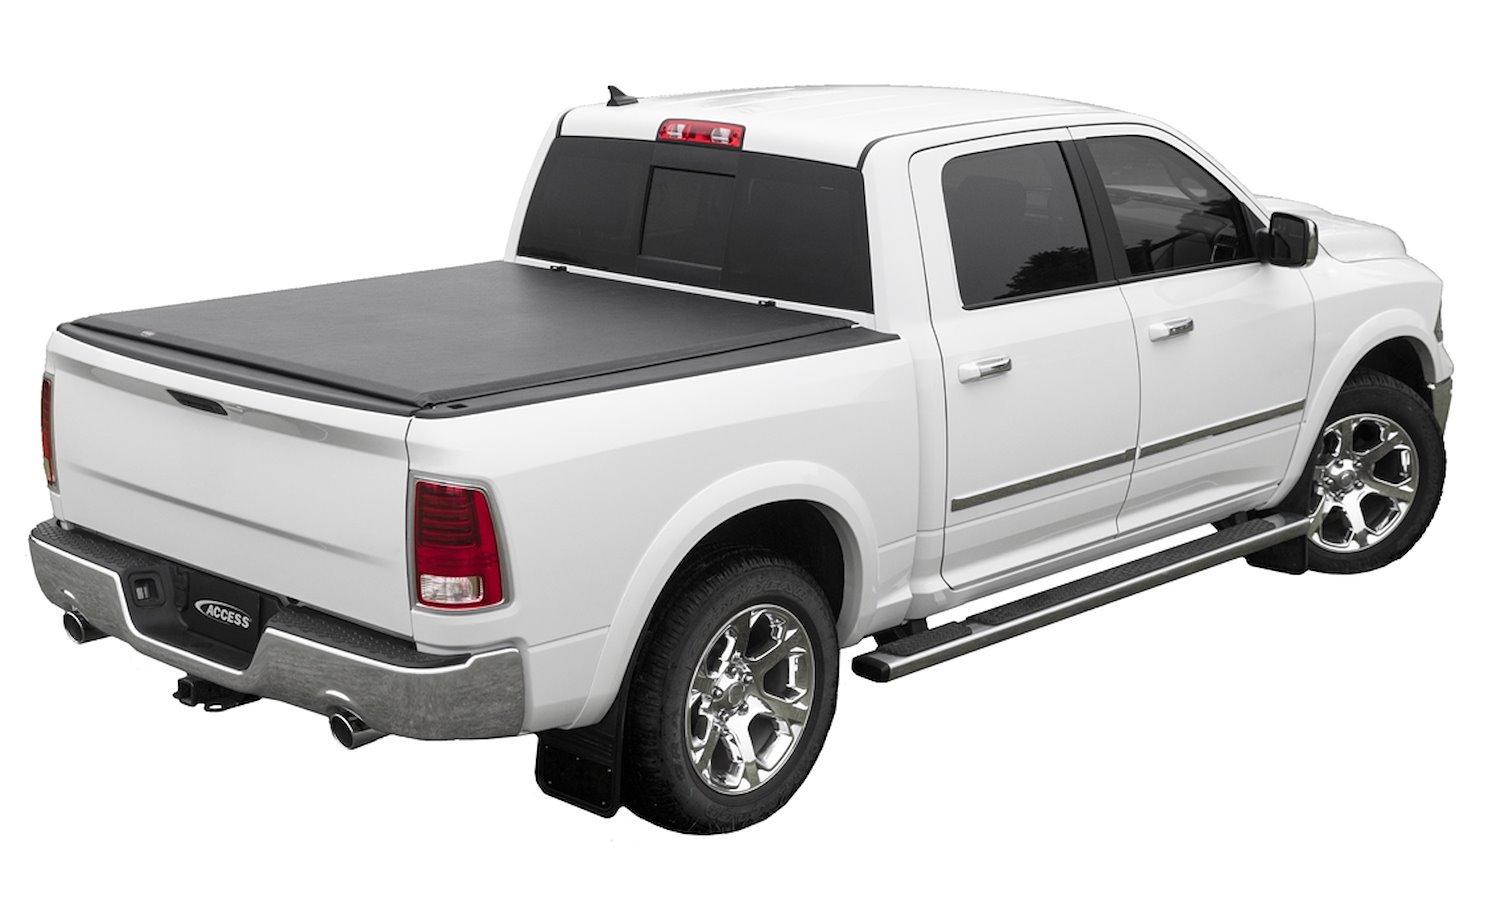 LORADO Roll-Up Tonneau Cover, Fits Select Ram 1500, with 5 ft. 7 in. Bed